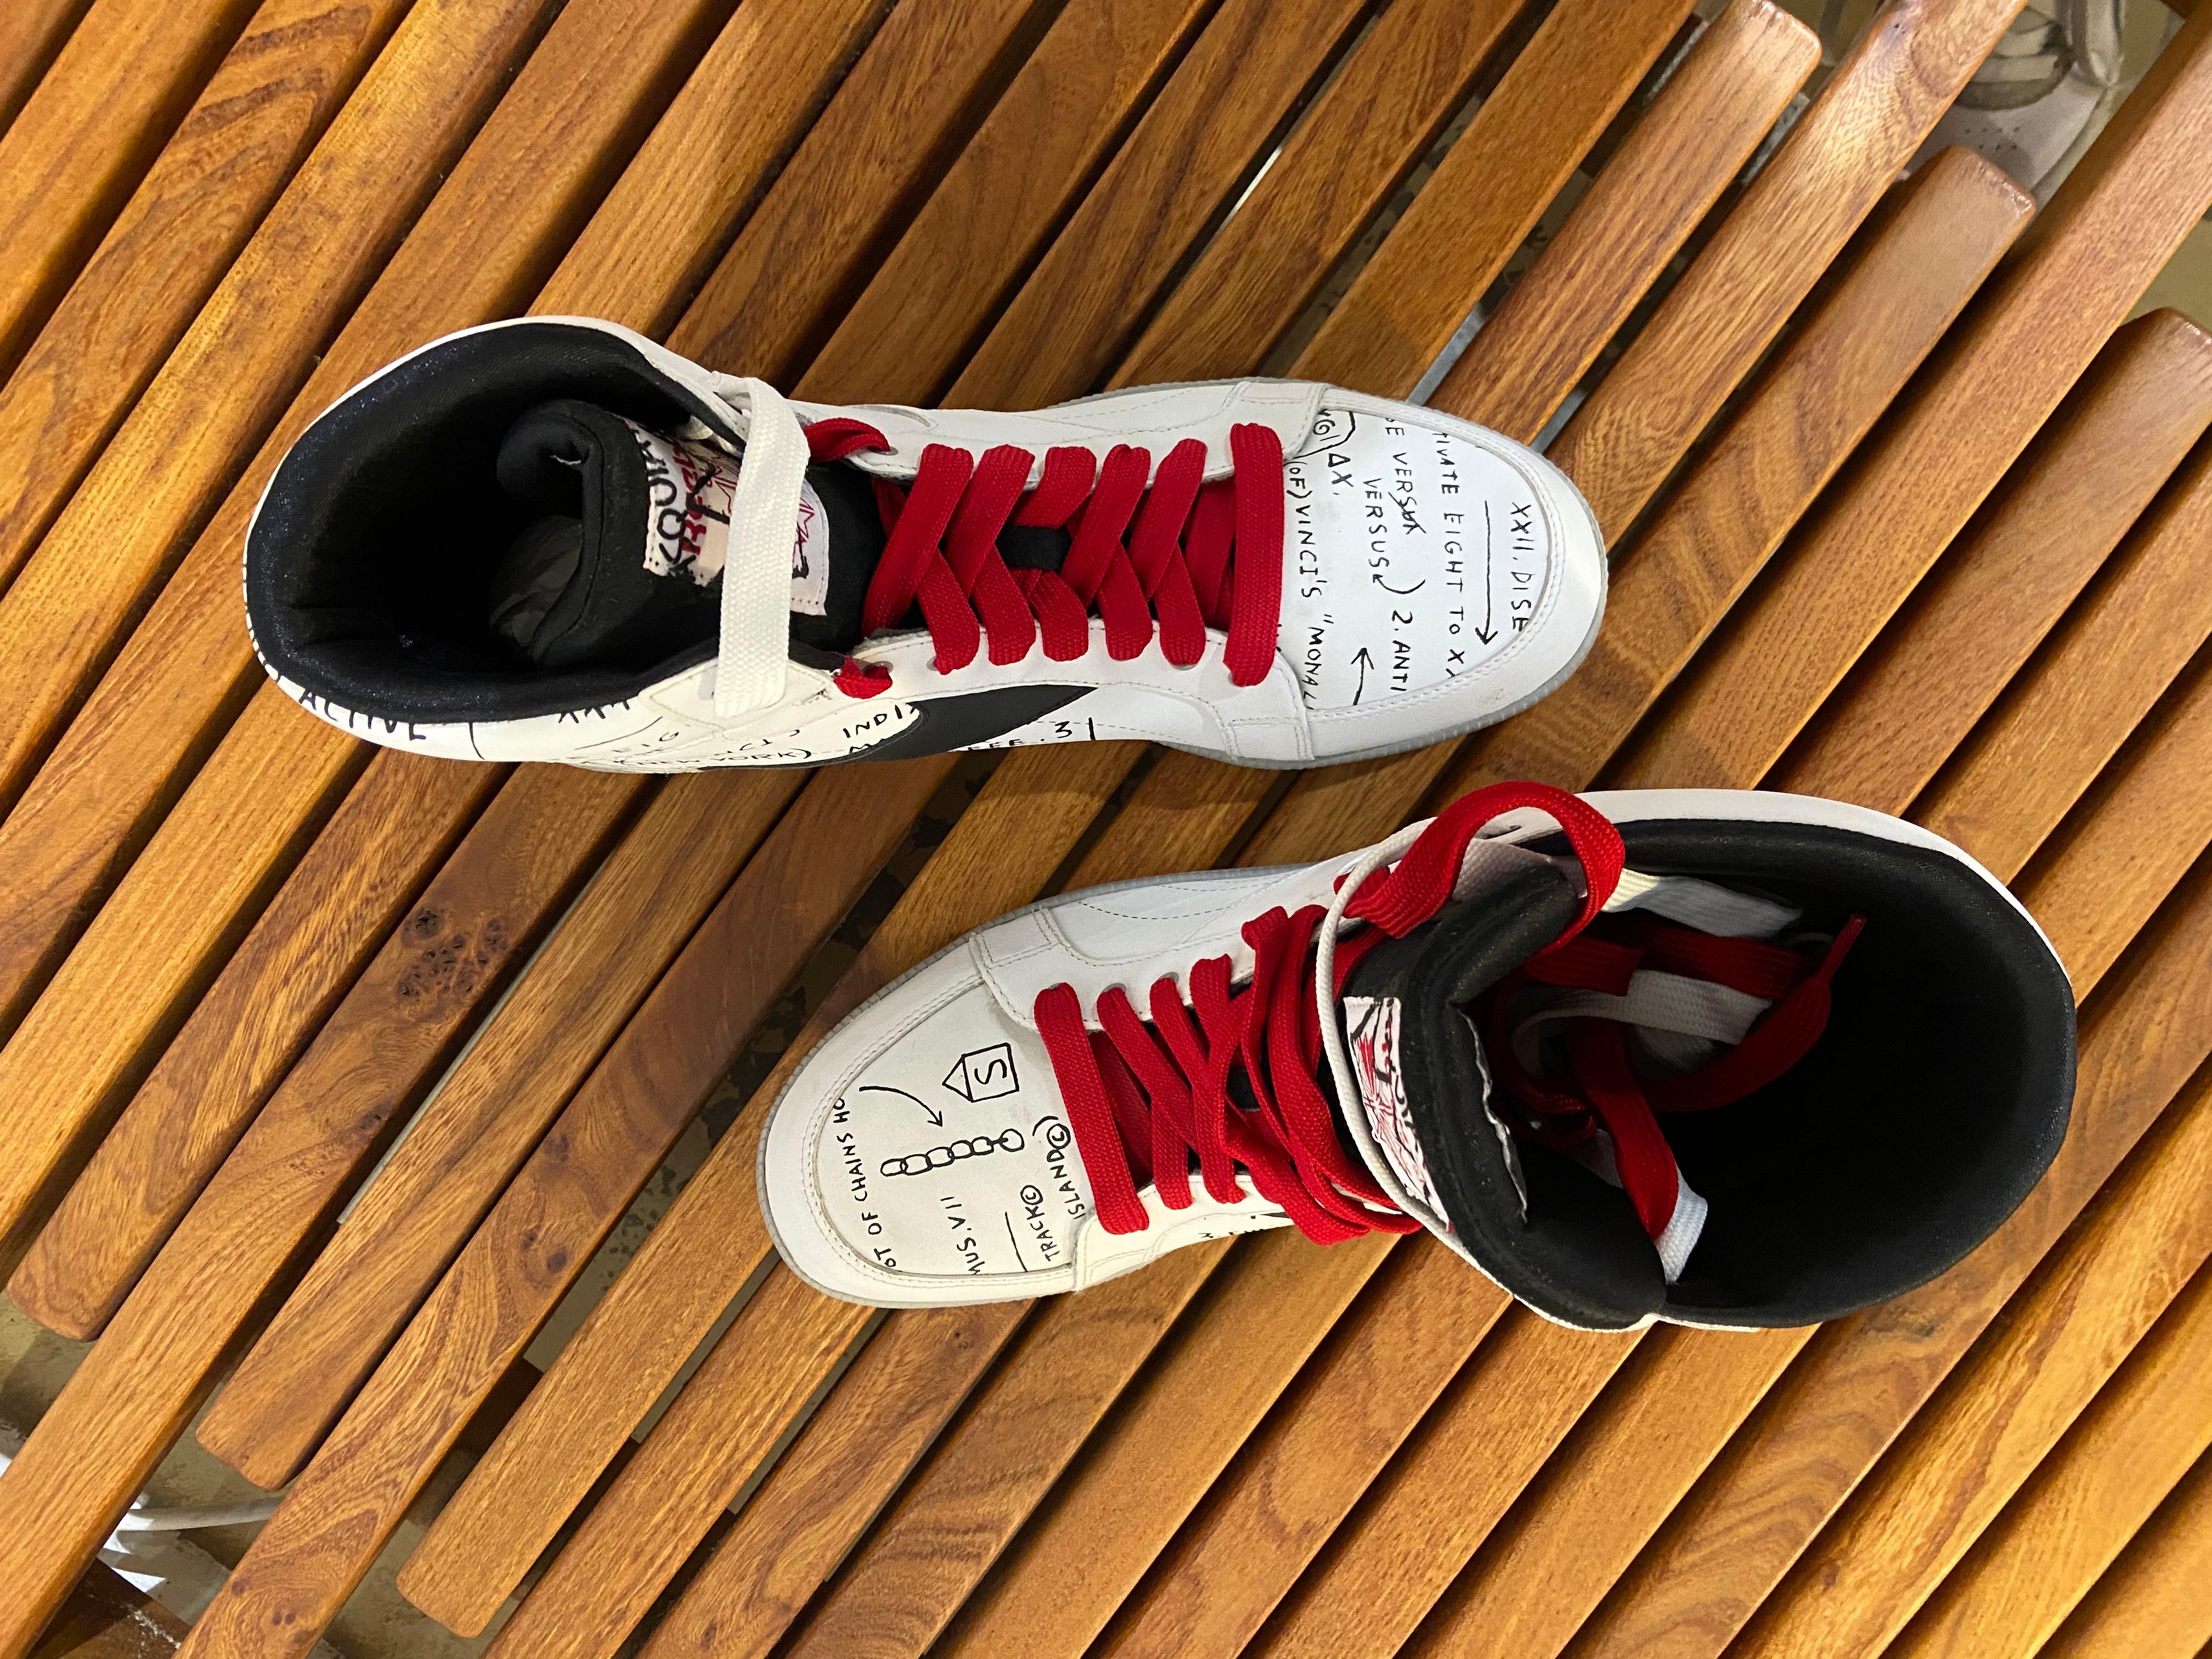 Reebok x Basquiat sneakers collection – White & Red, 2012

Limited Edition Basquiat 

Shoe size : eur 44, UK 9,5, usa 10,5

New, box is new, perfect condition

by Swizz Beatz Collection.